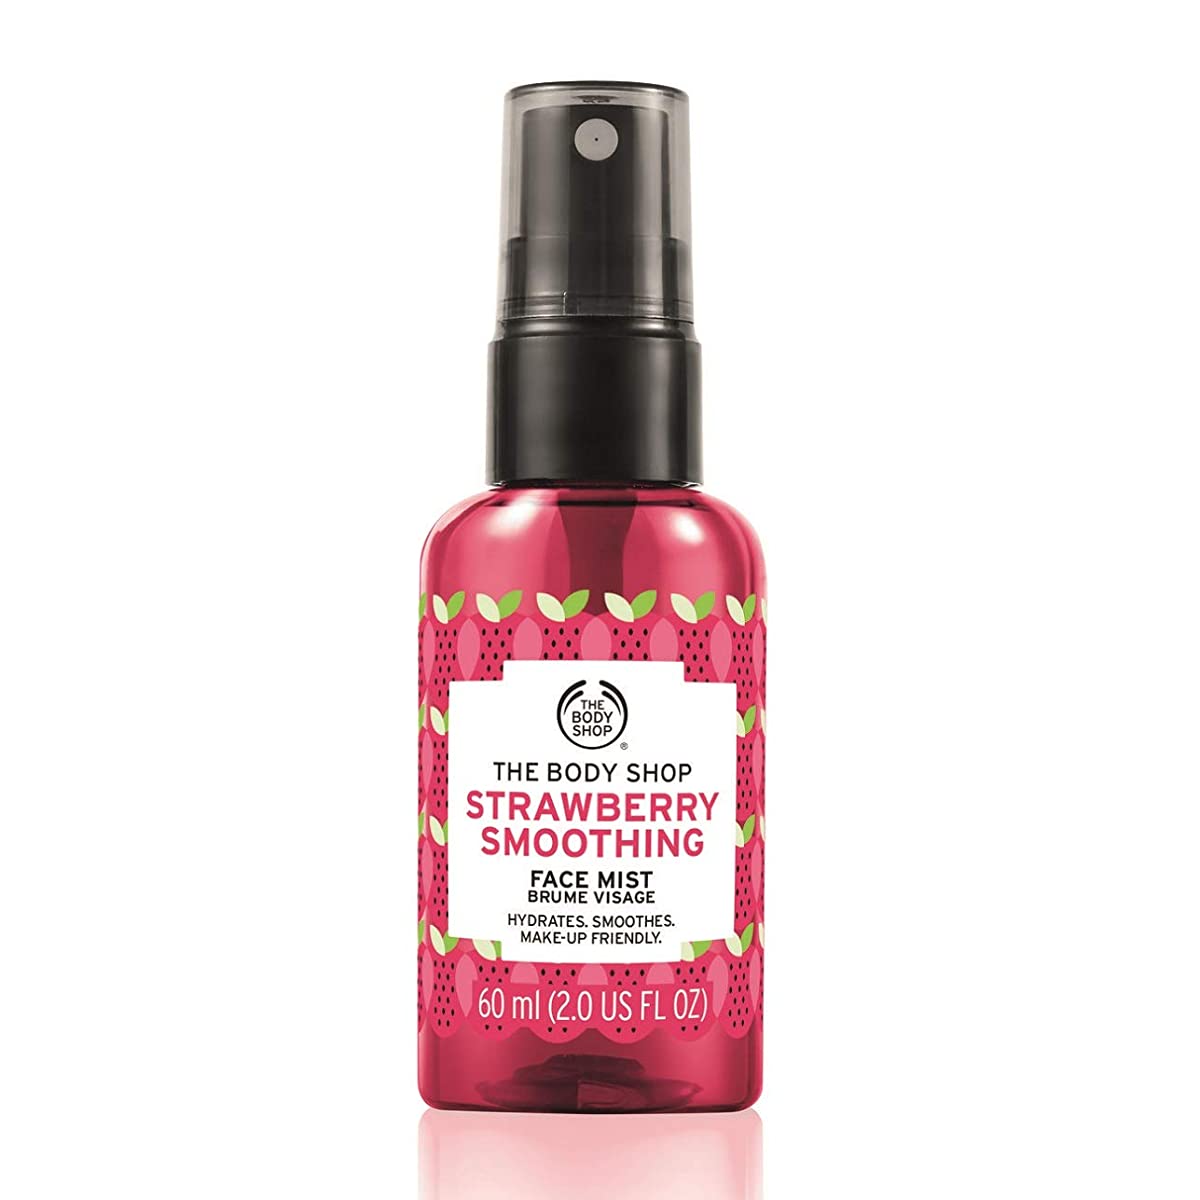 The Body Shop Strawberry Smoothing Face Mist (60 ml) The Body Shop